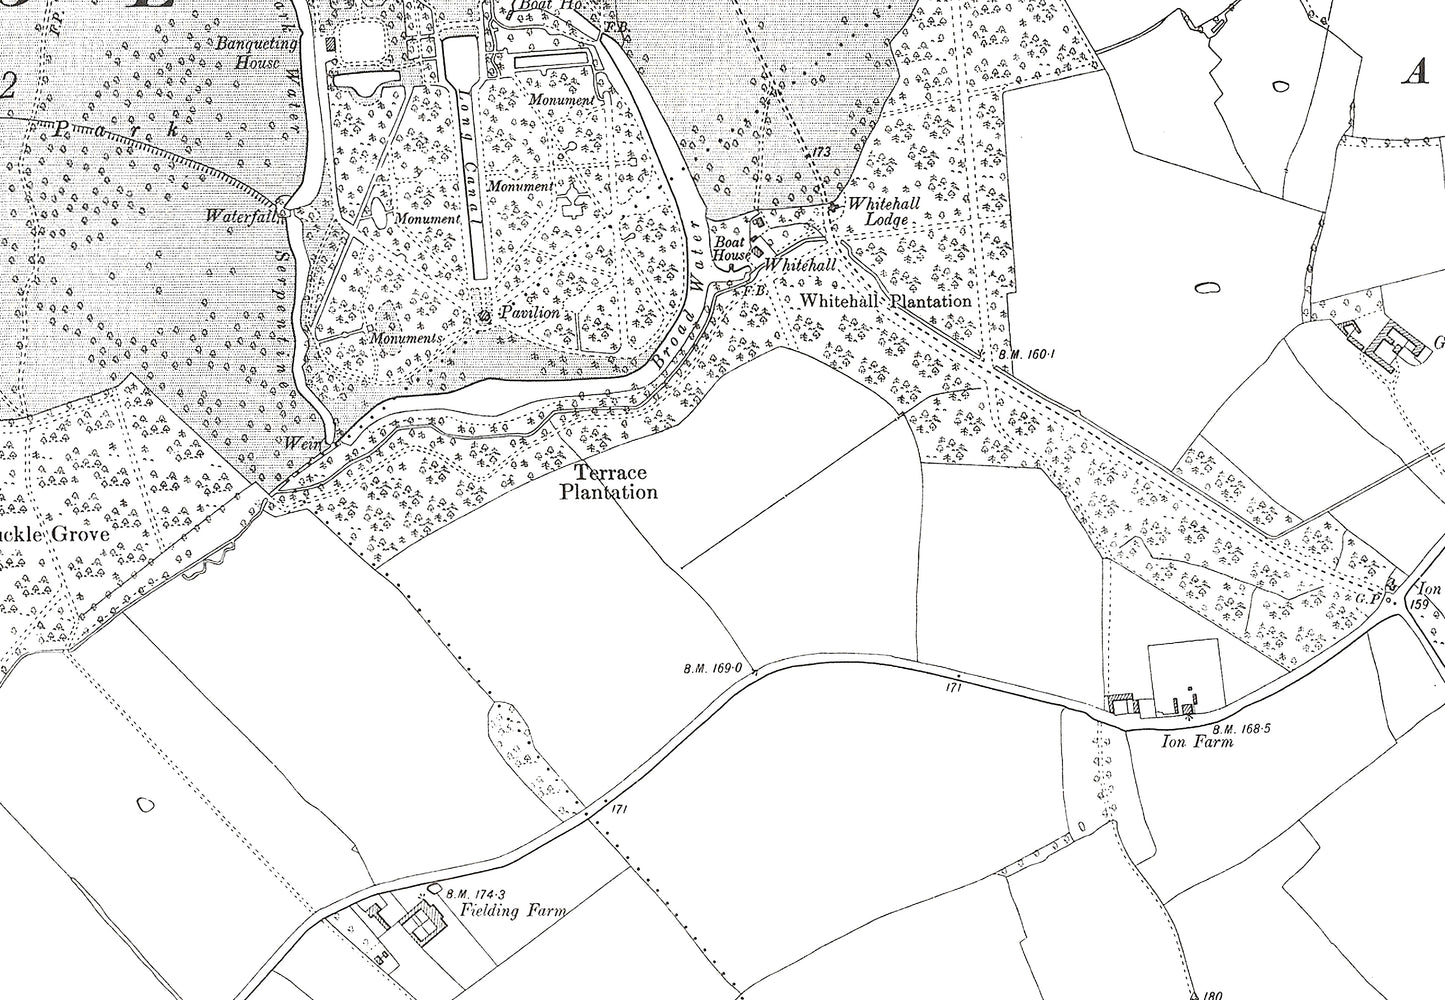 A 1901 map showing Silsoe and Gravenhurst in Bedfordshire - A Digital Download 0f OS 1:10560 scale map, Beds 26NW